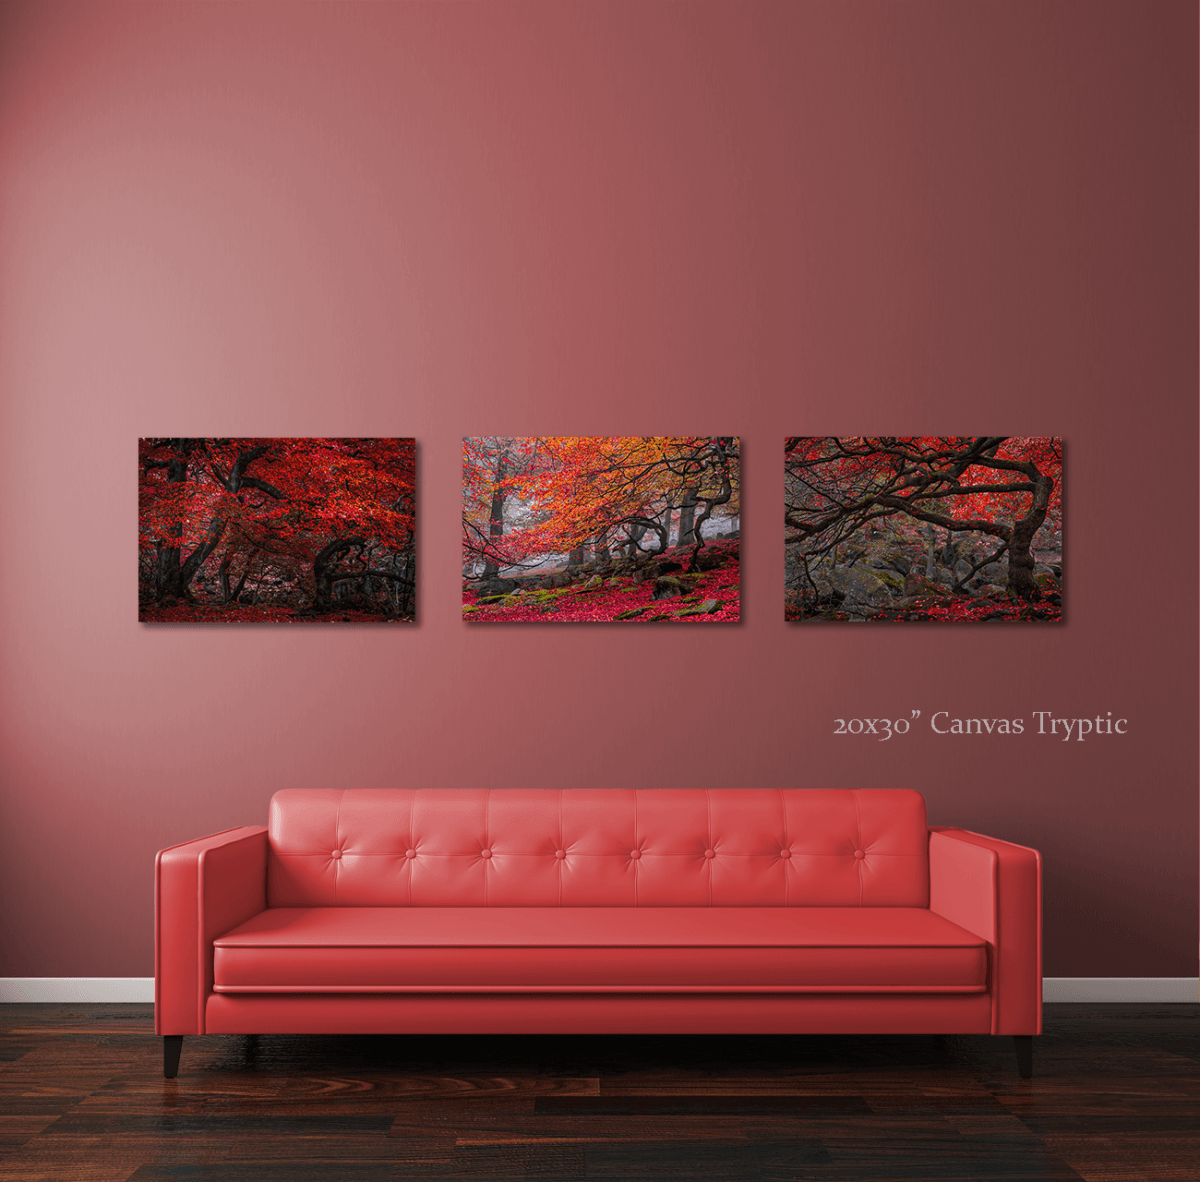 *Special Order* Deep In The Forest / Red Forest / Twisted Tree - 20x30 Canvas Prints by Ben Robson Hull